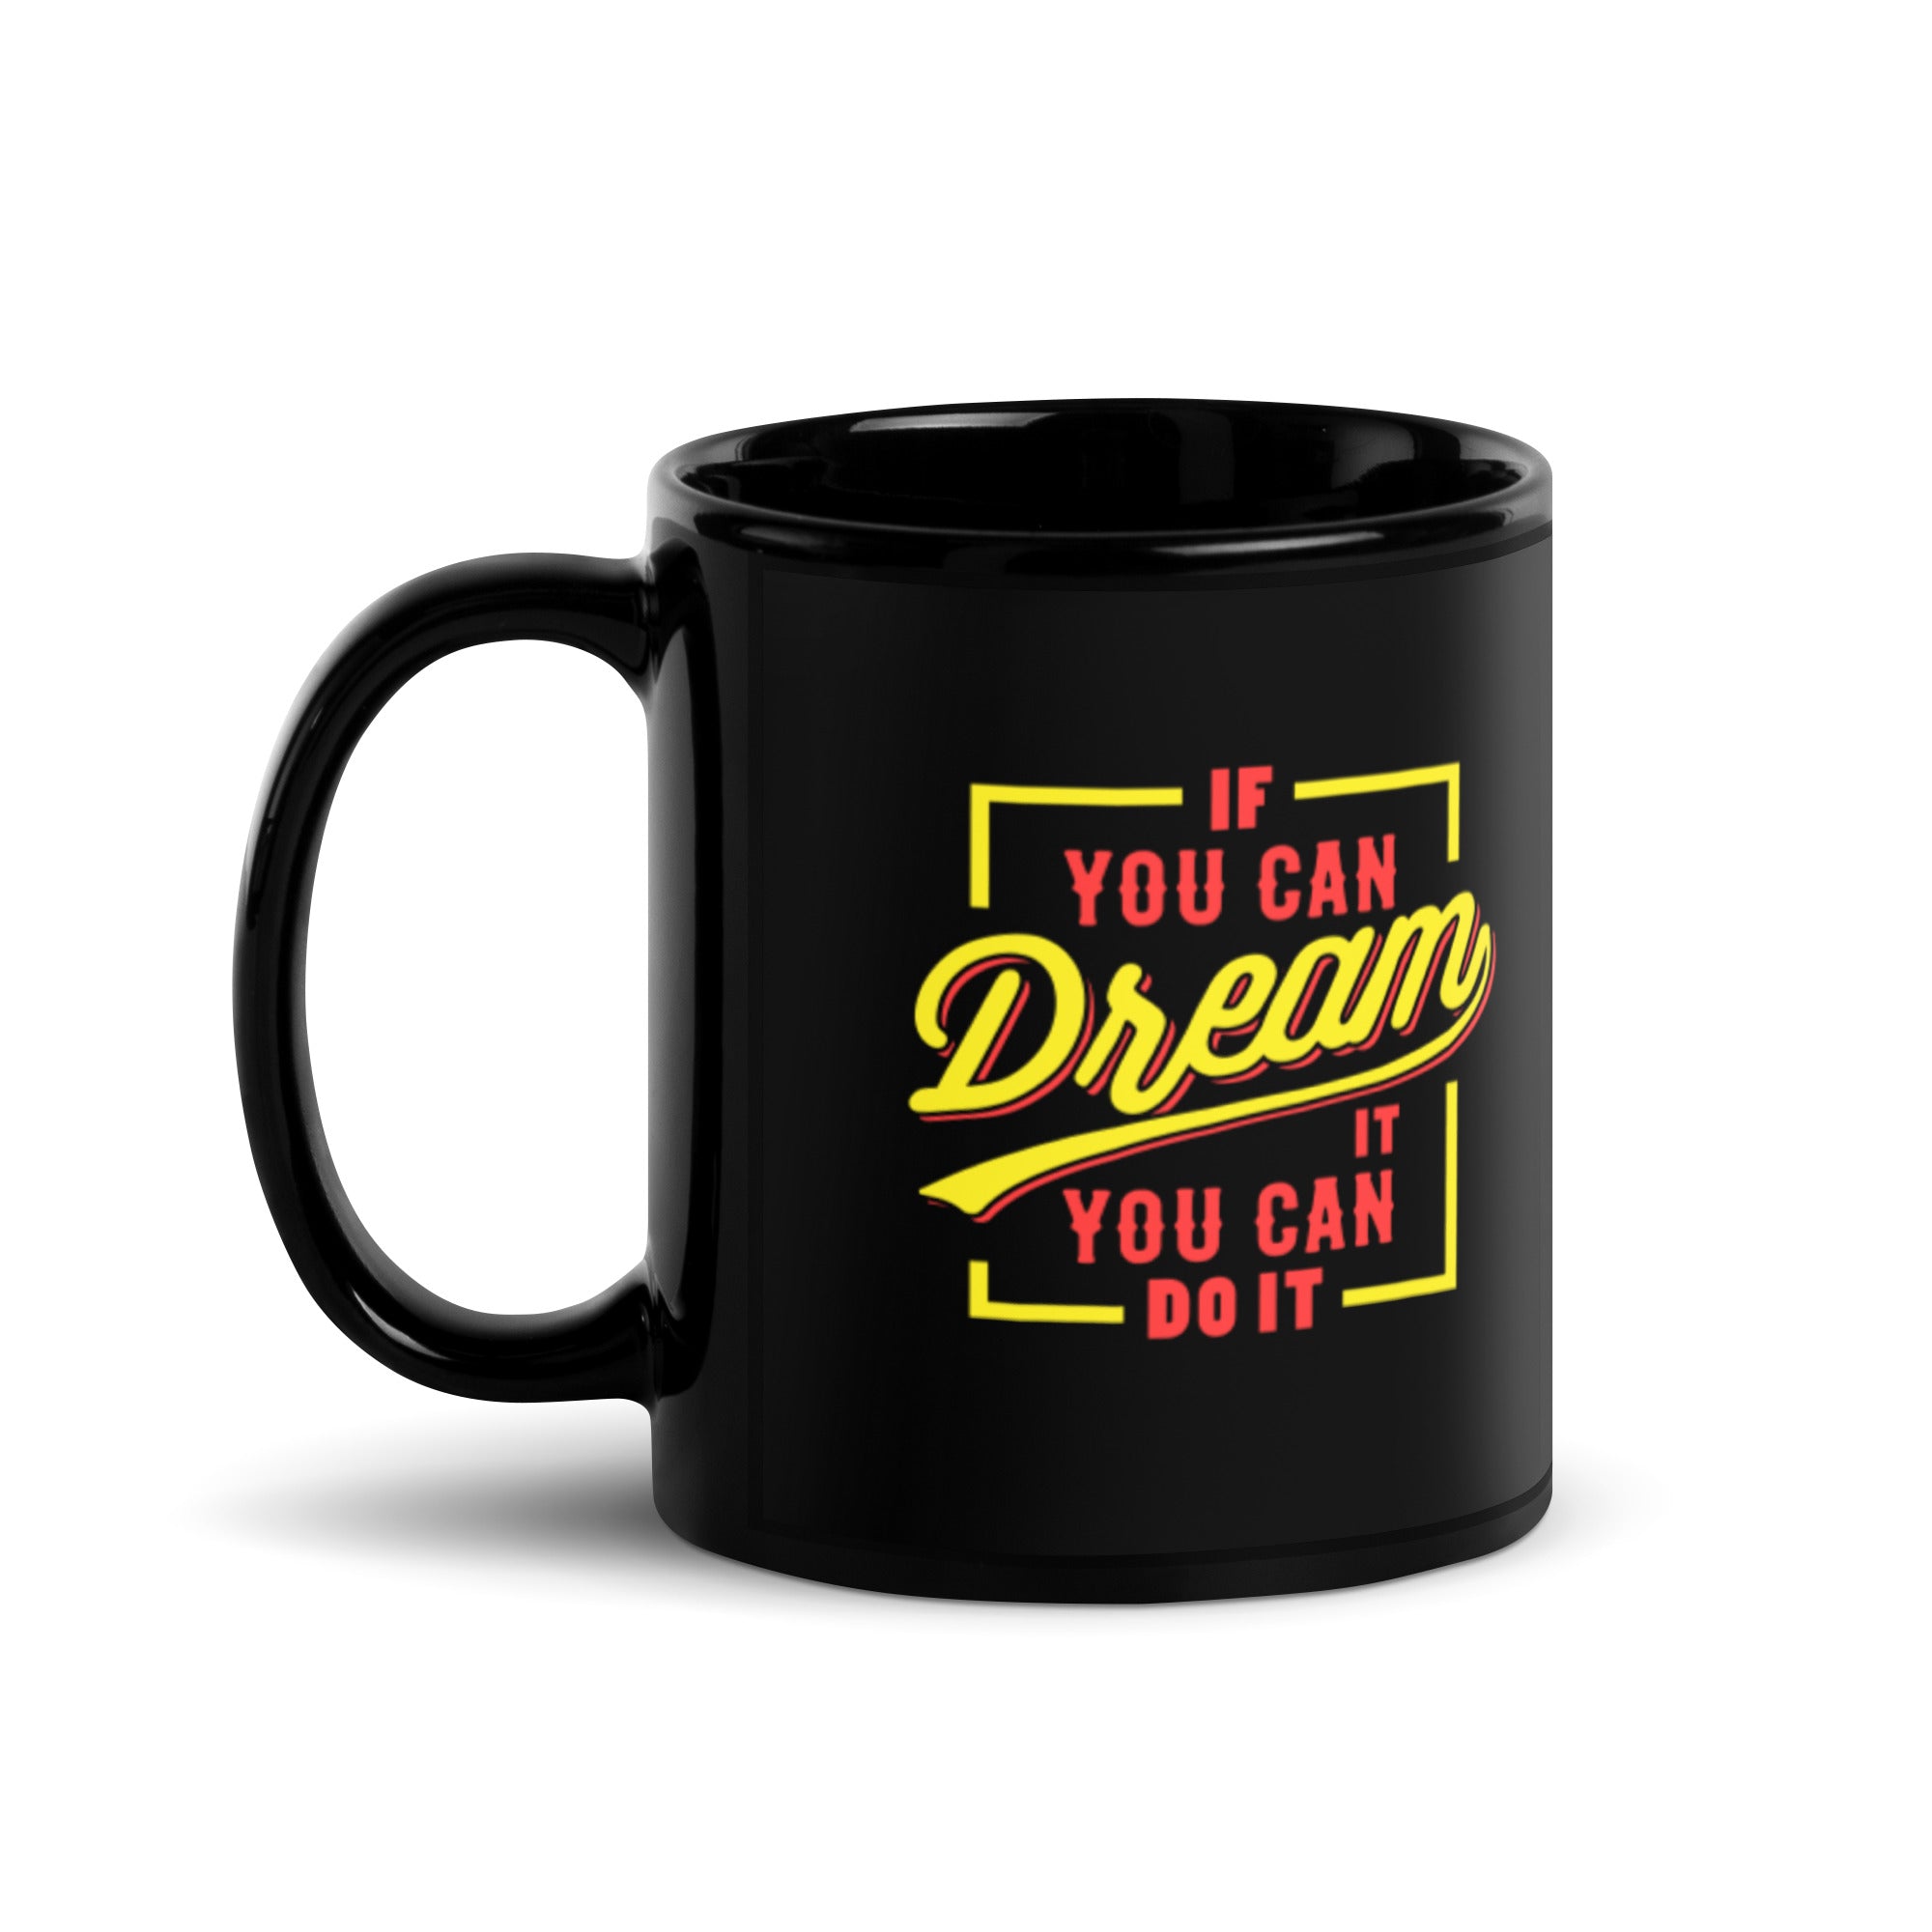 If You Can Dream It You Can Do It - Black Glossy Mug